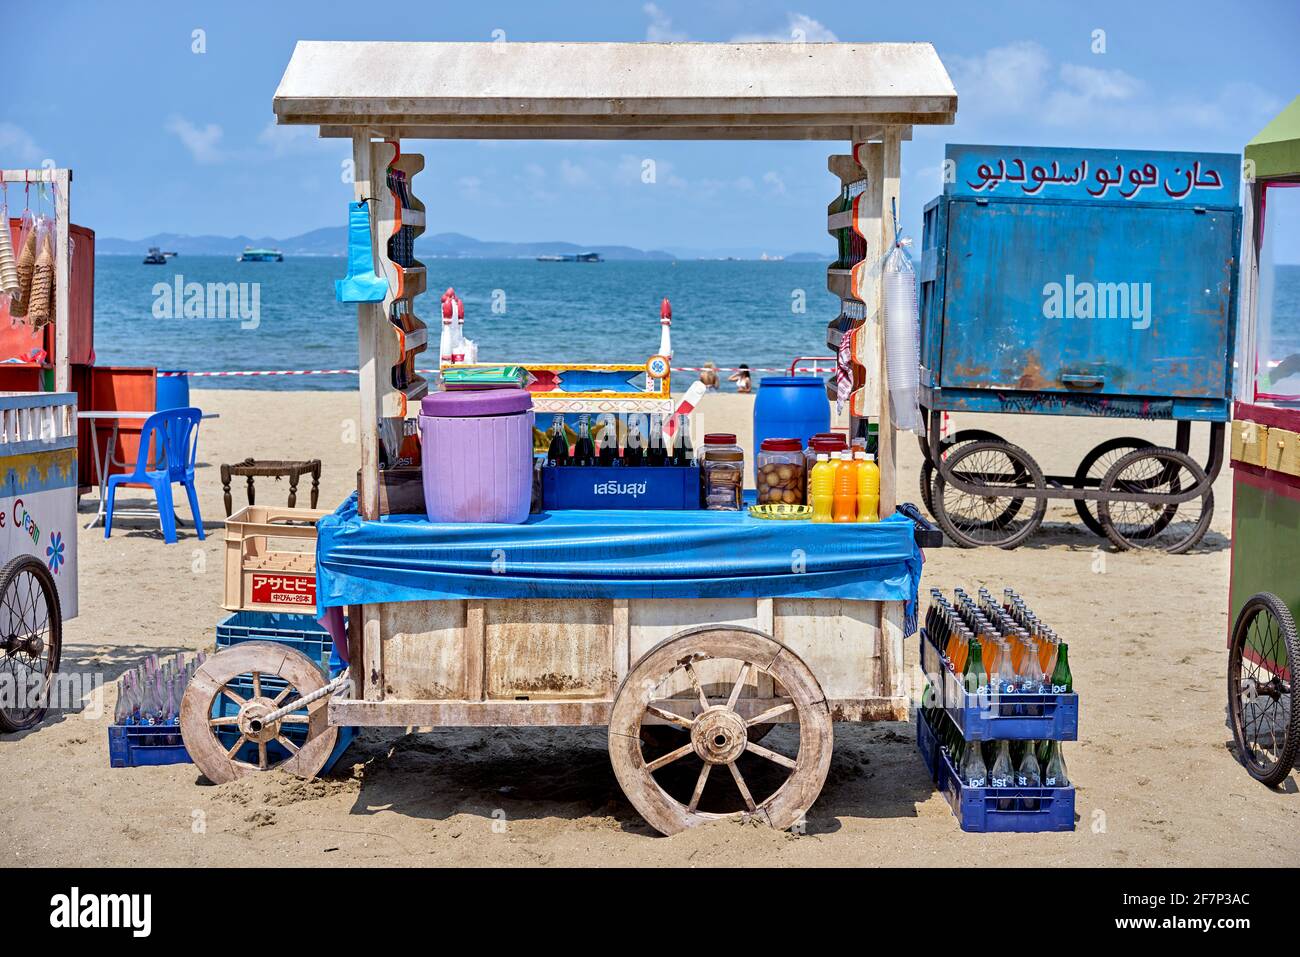 Vintage food carts lining up on the beach as a novelty attraction. Pattaya, Thailand, Southeast Asia. Stock Photo